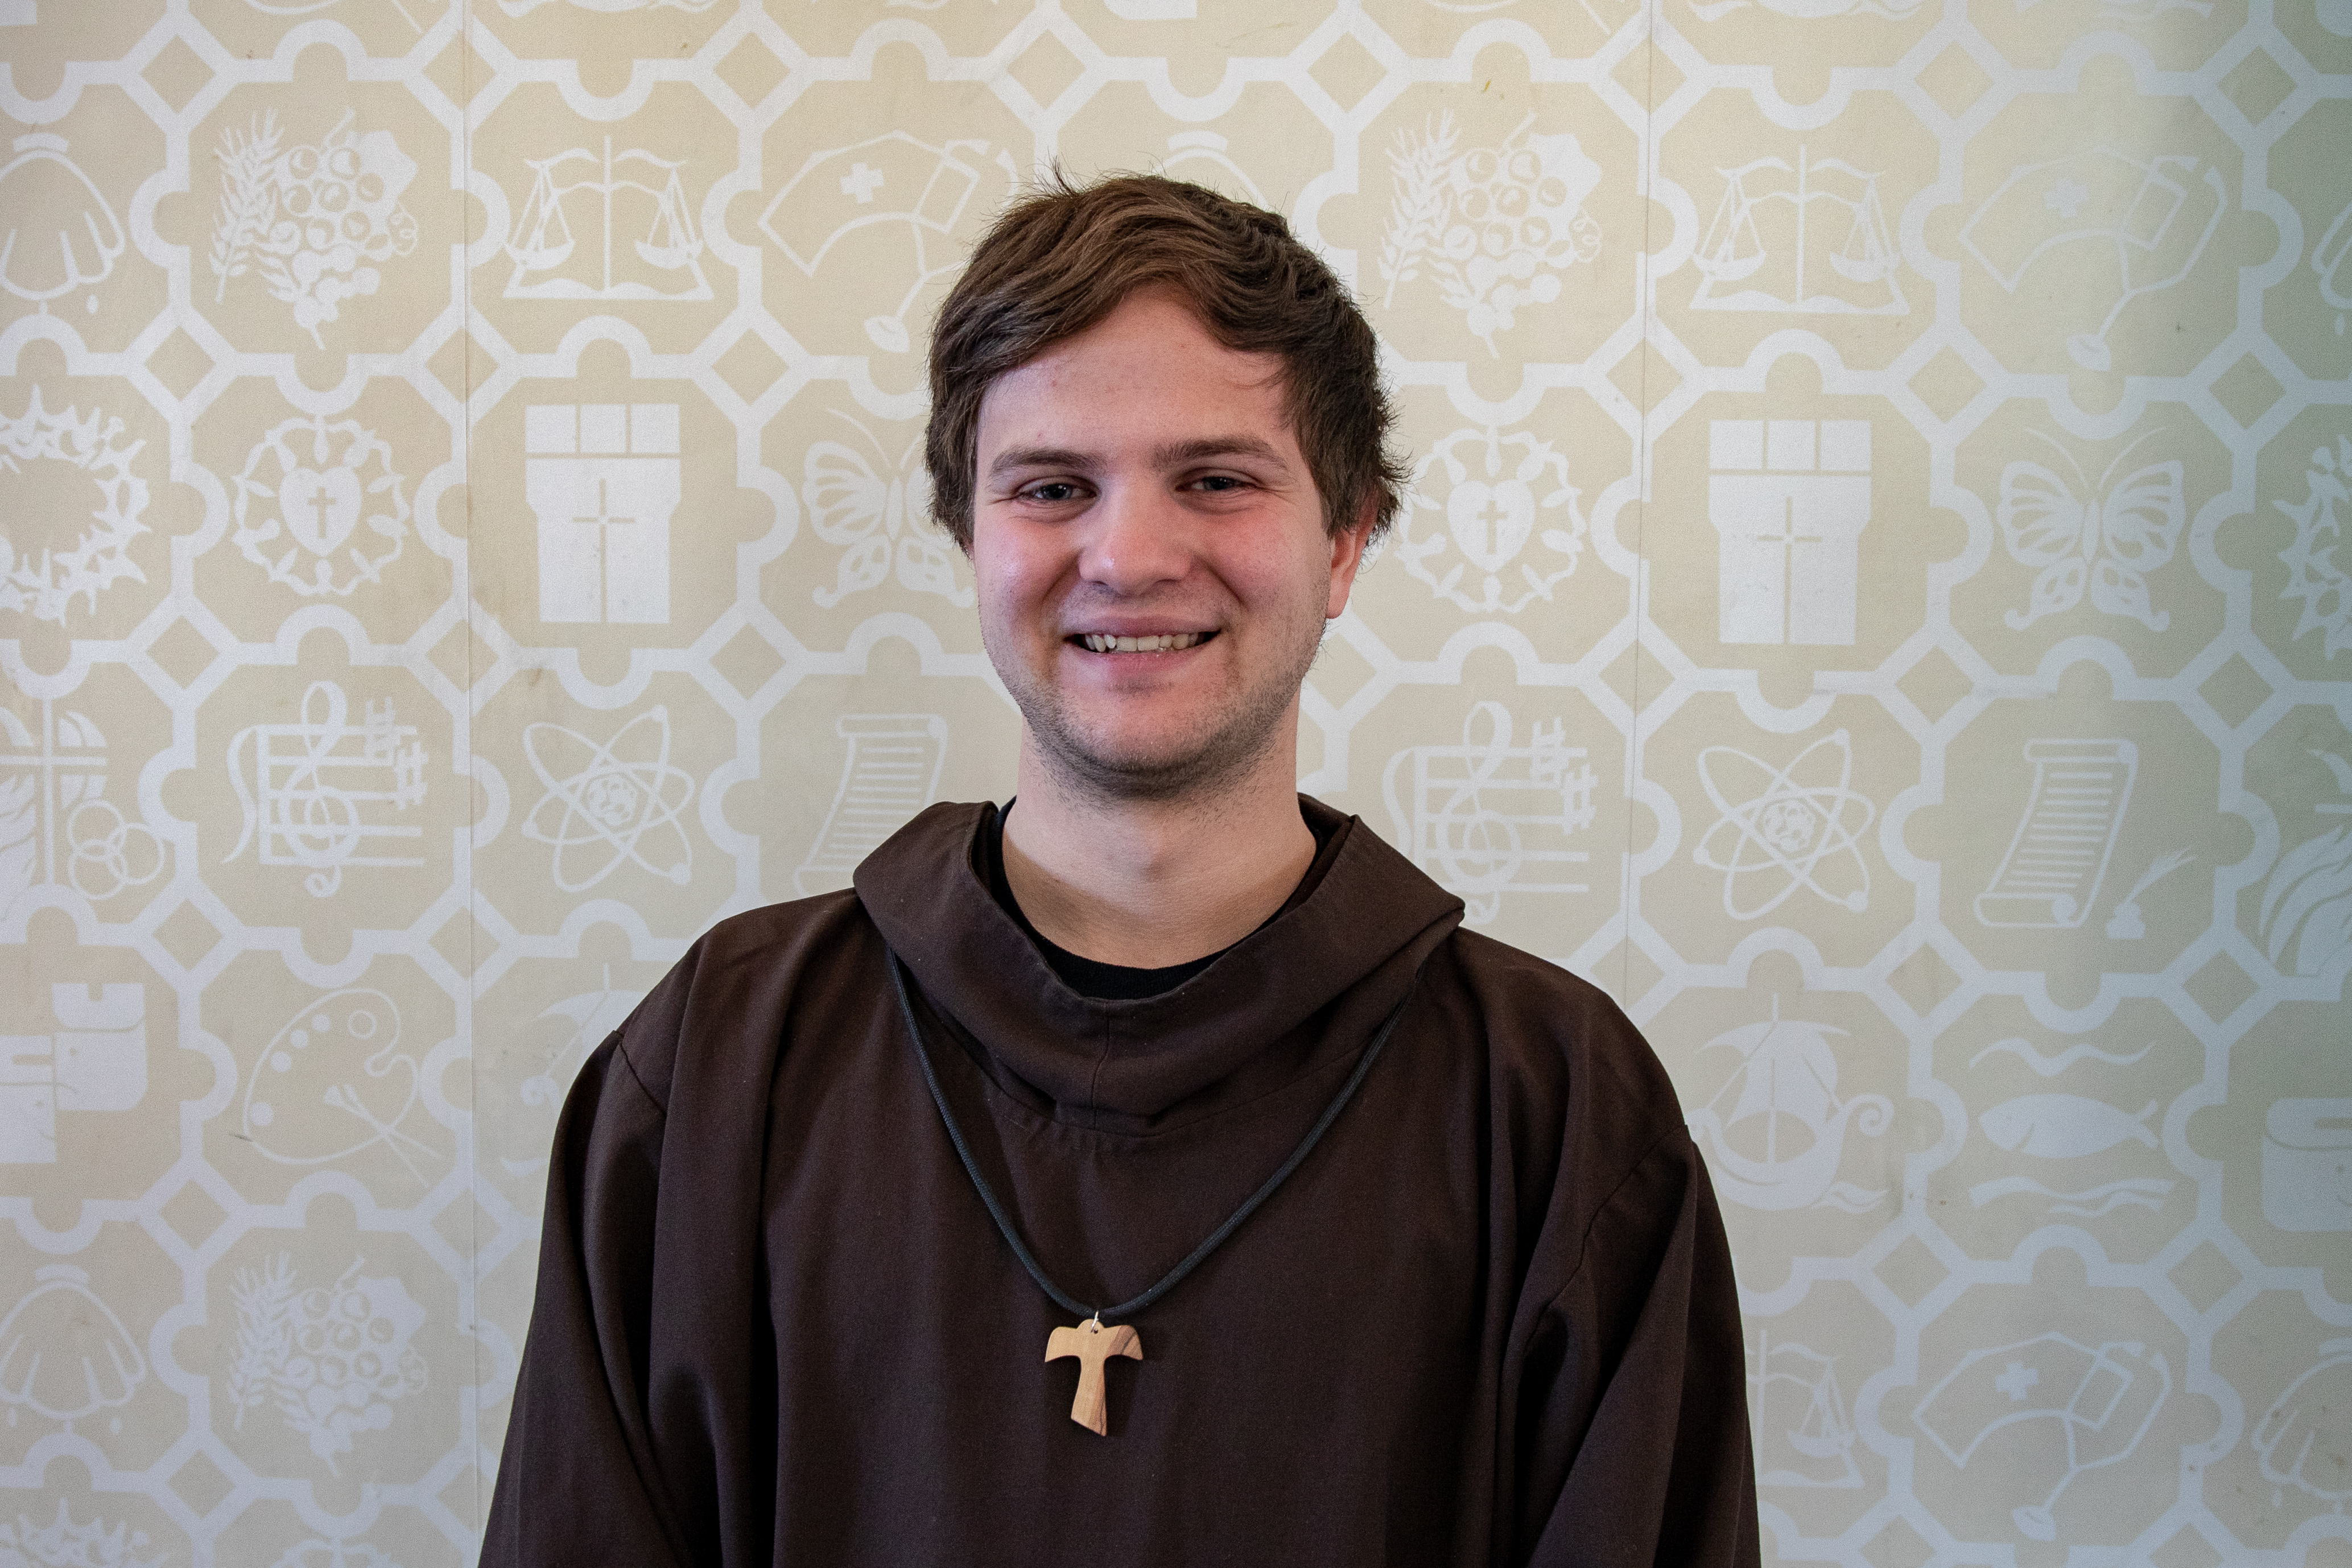 Student enters process to become Lutheran pastor